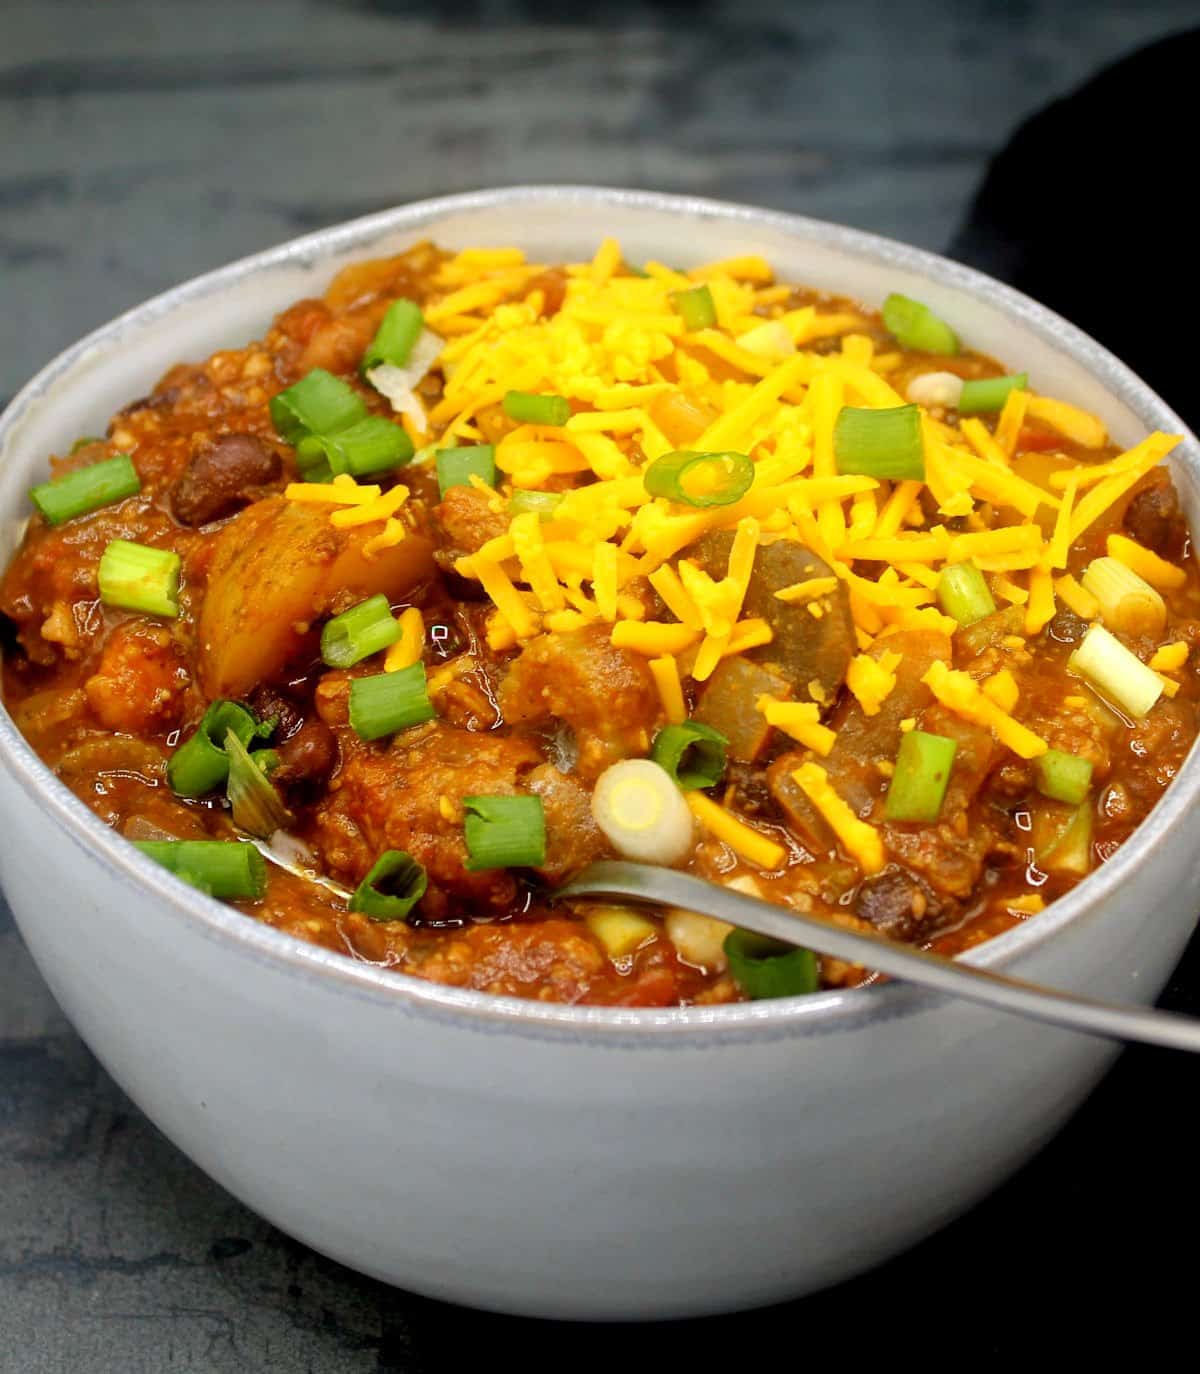 Front photo of a gray ceramic bowl with vegan Irish chili with a garnish of scallons and vegan cheddar cheese shreds.